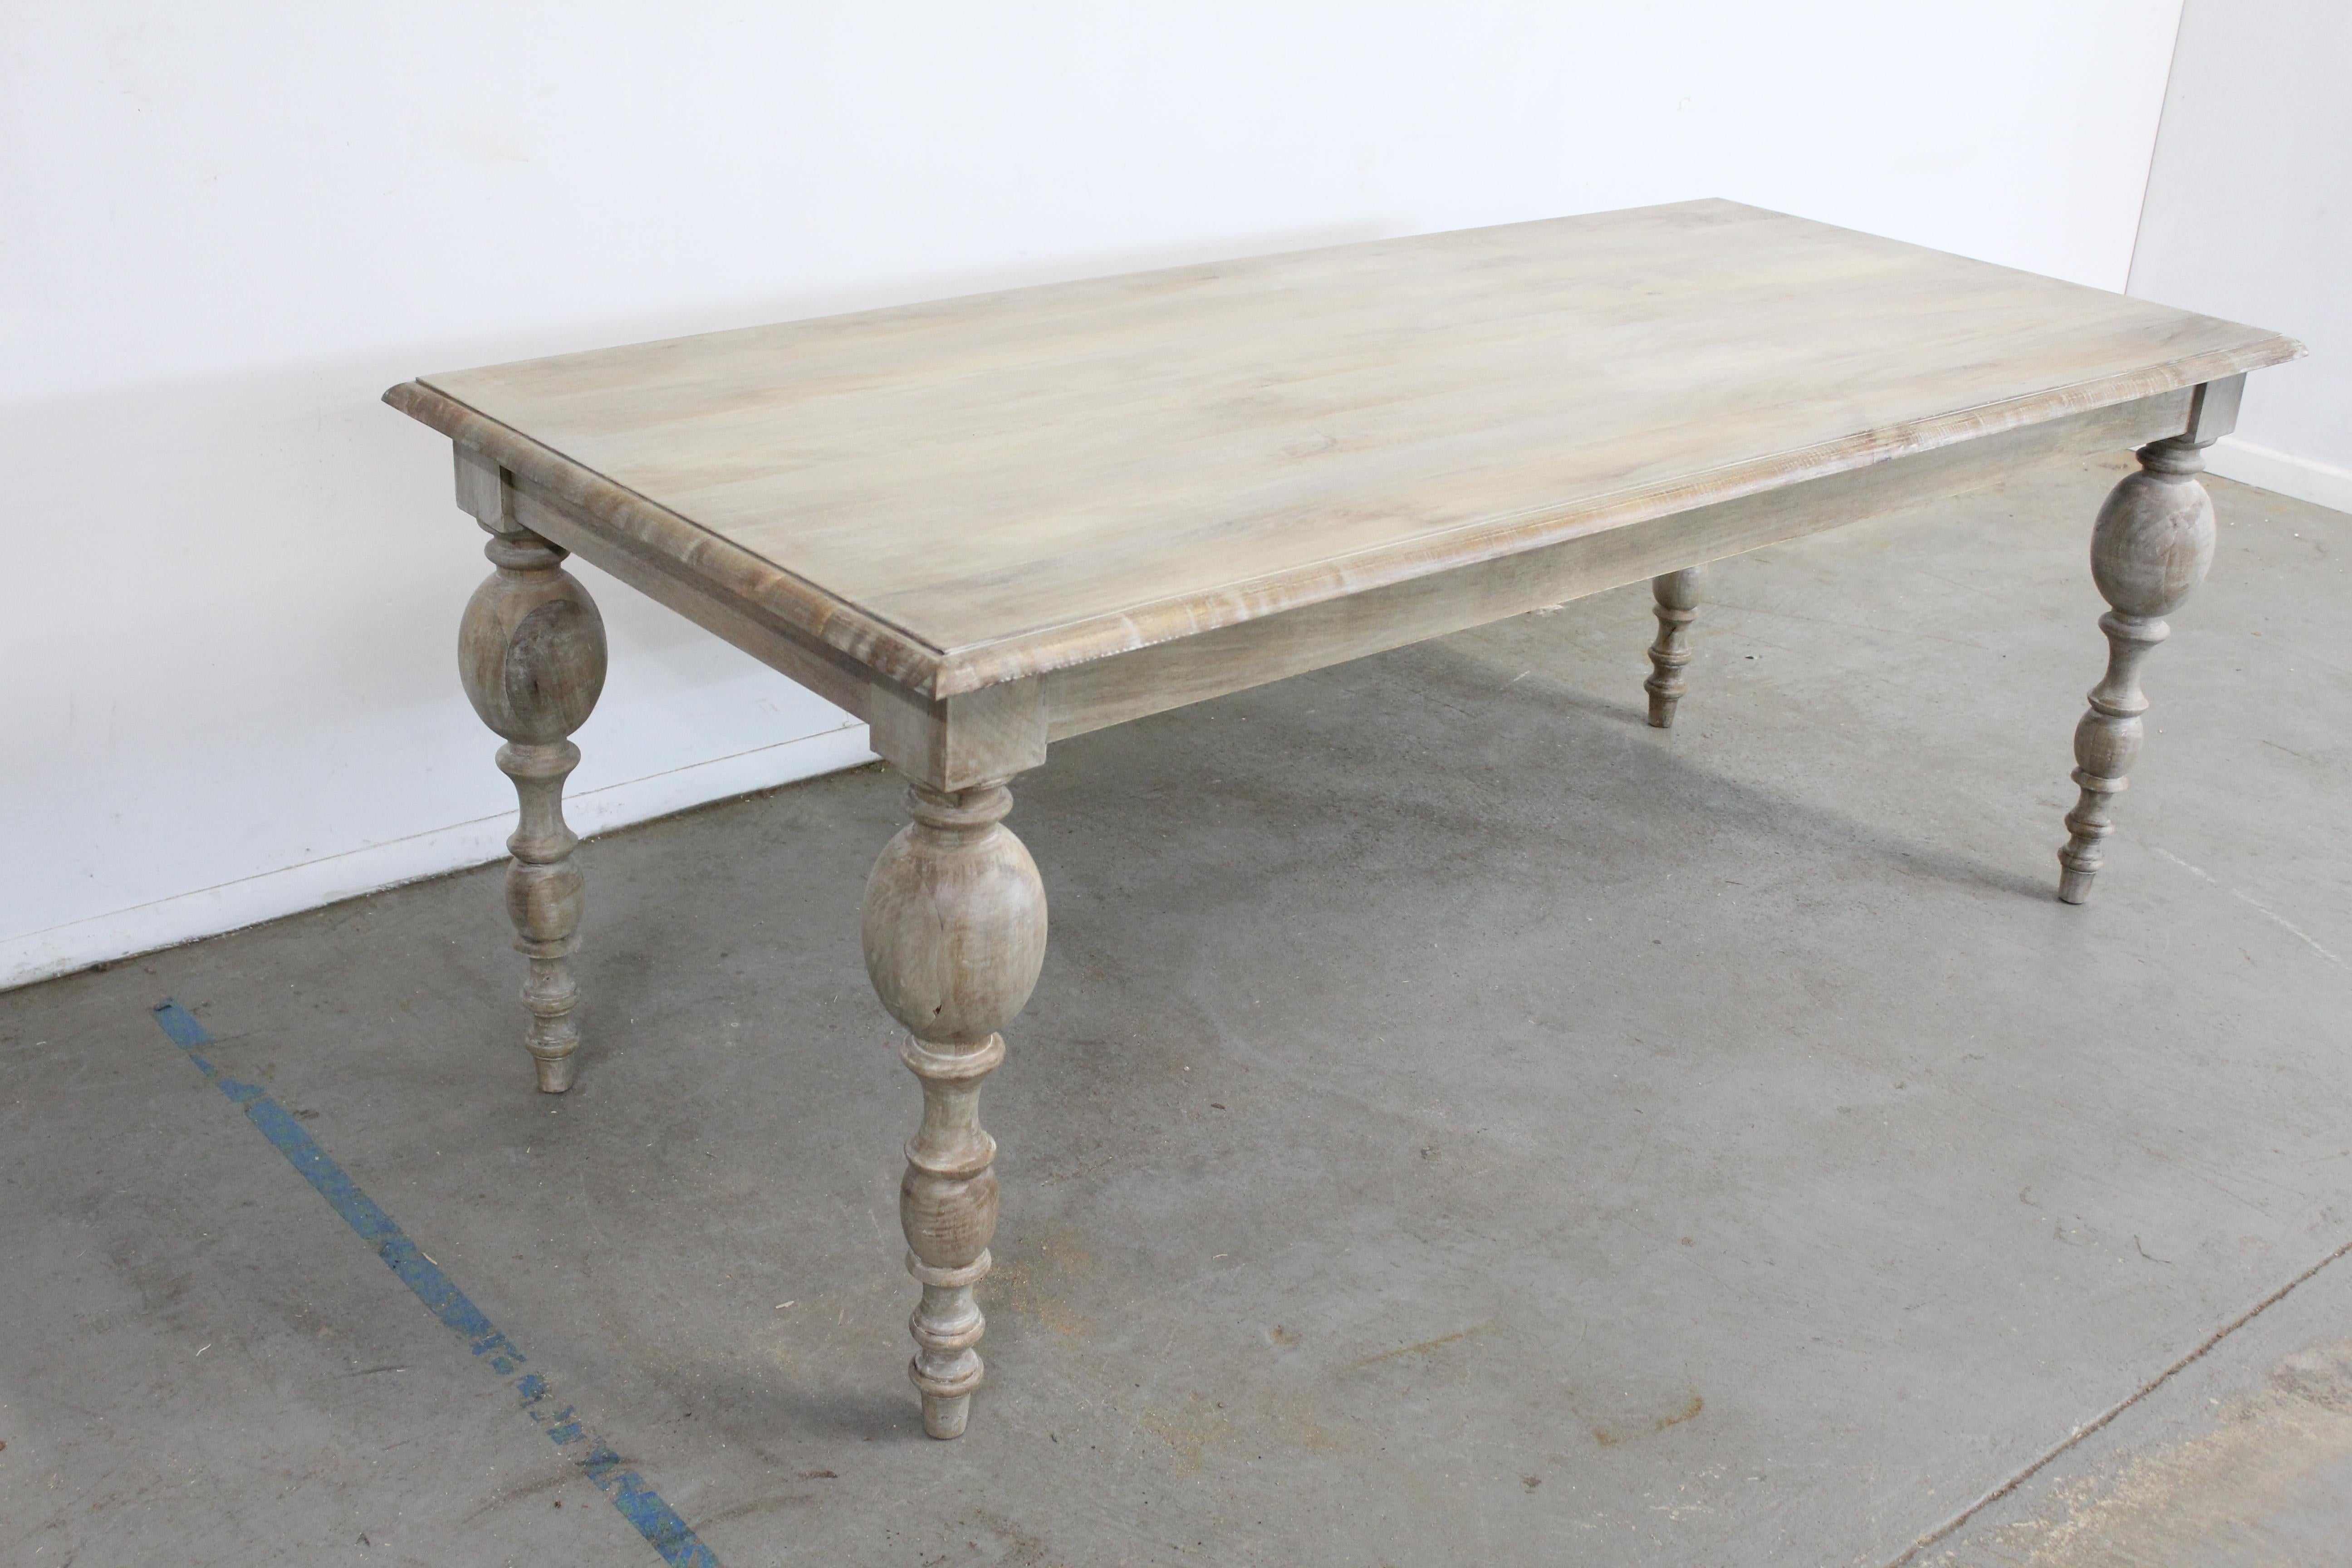 What a find. Offered is a solid wood French country dining table. It has a great look to it with carved legs and a Primitive/rustic finish. This piece has never been in a home and is a floor model. Each table has a rustic finish and will have